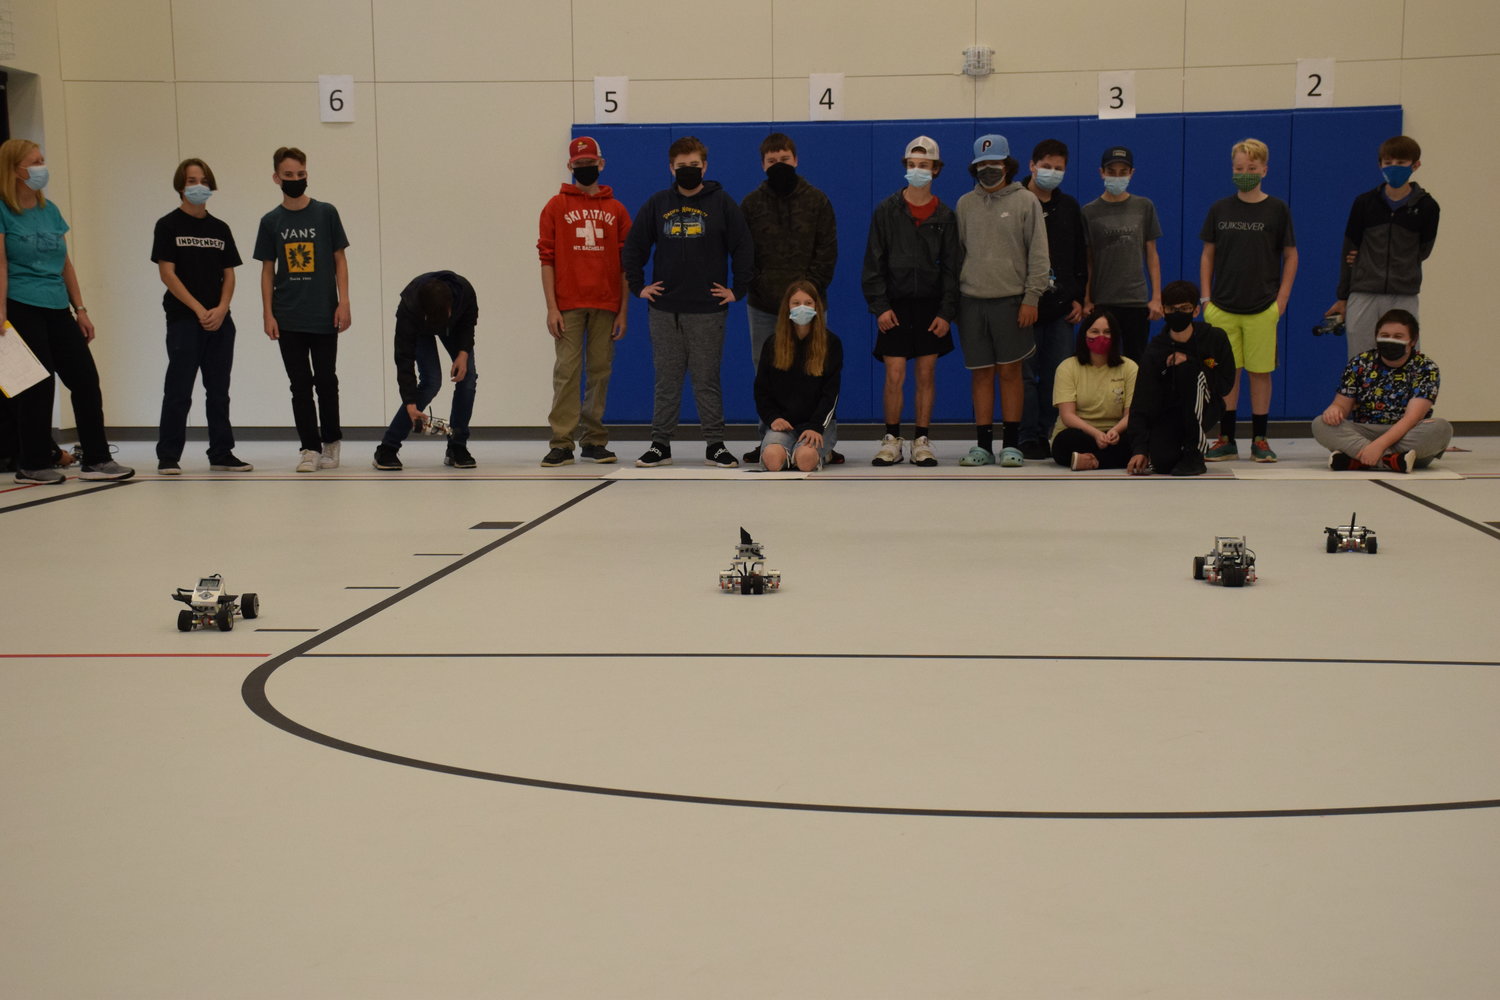 La Center Middle School teacher Kristy Schneider’s advanced robotics class tests out their drag racing robots in the small gym at the new middle school on Oct. 14.